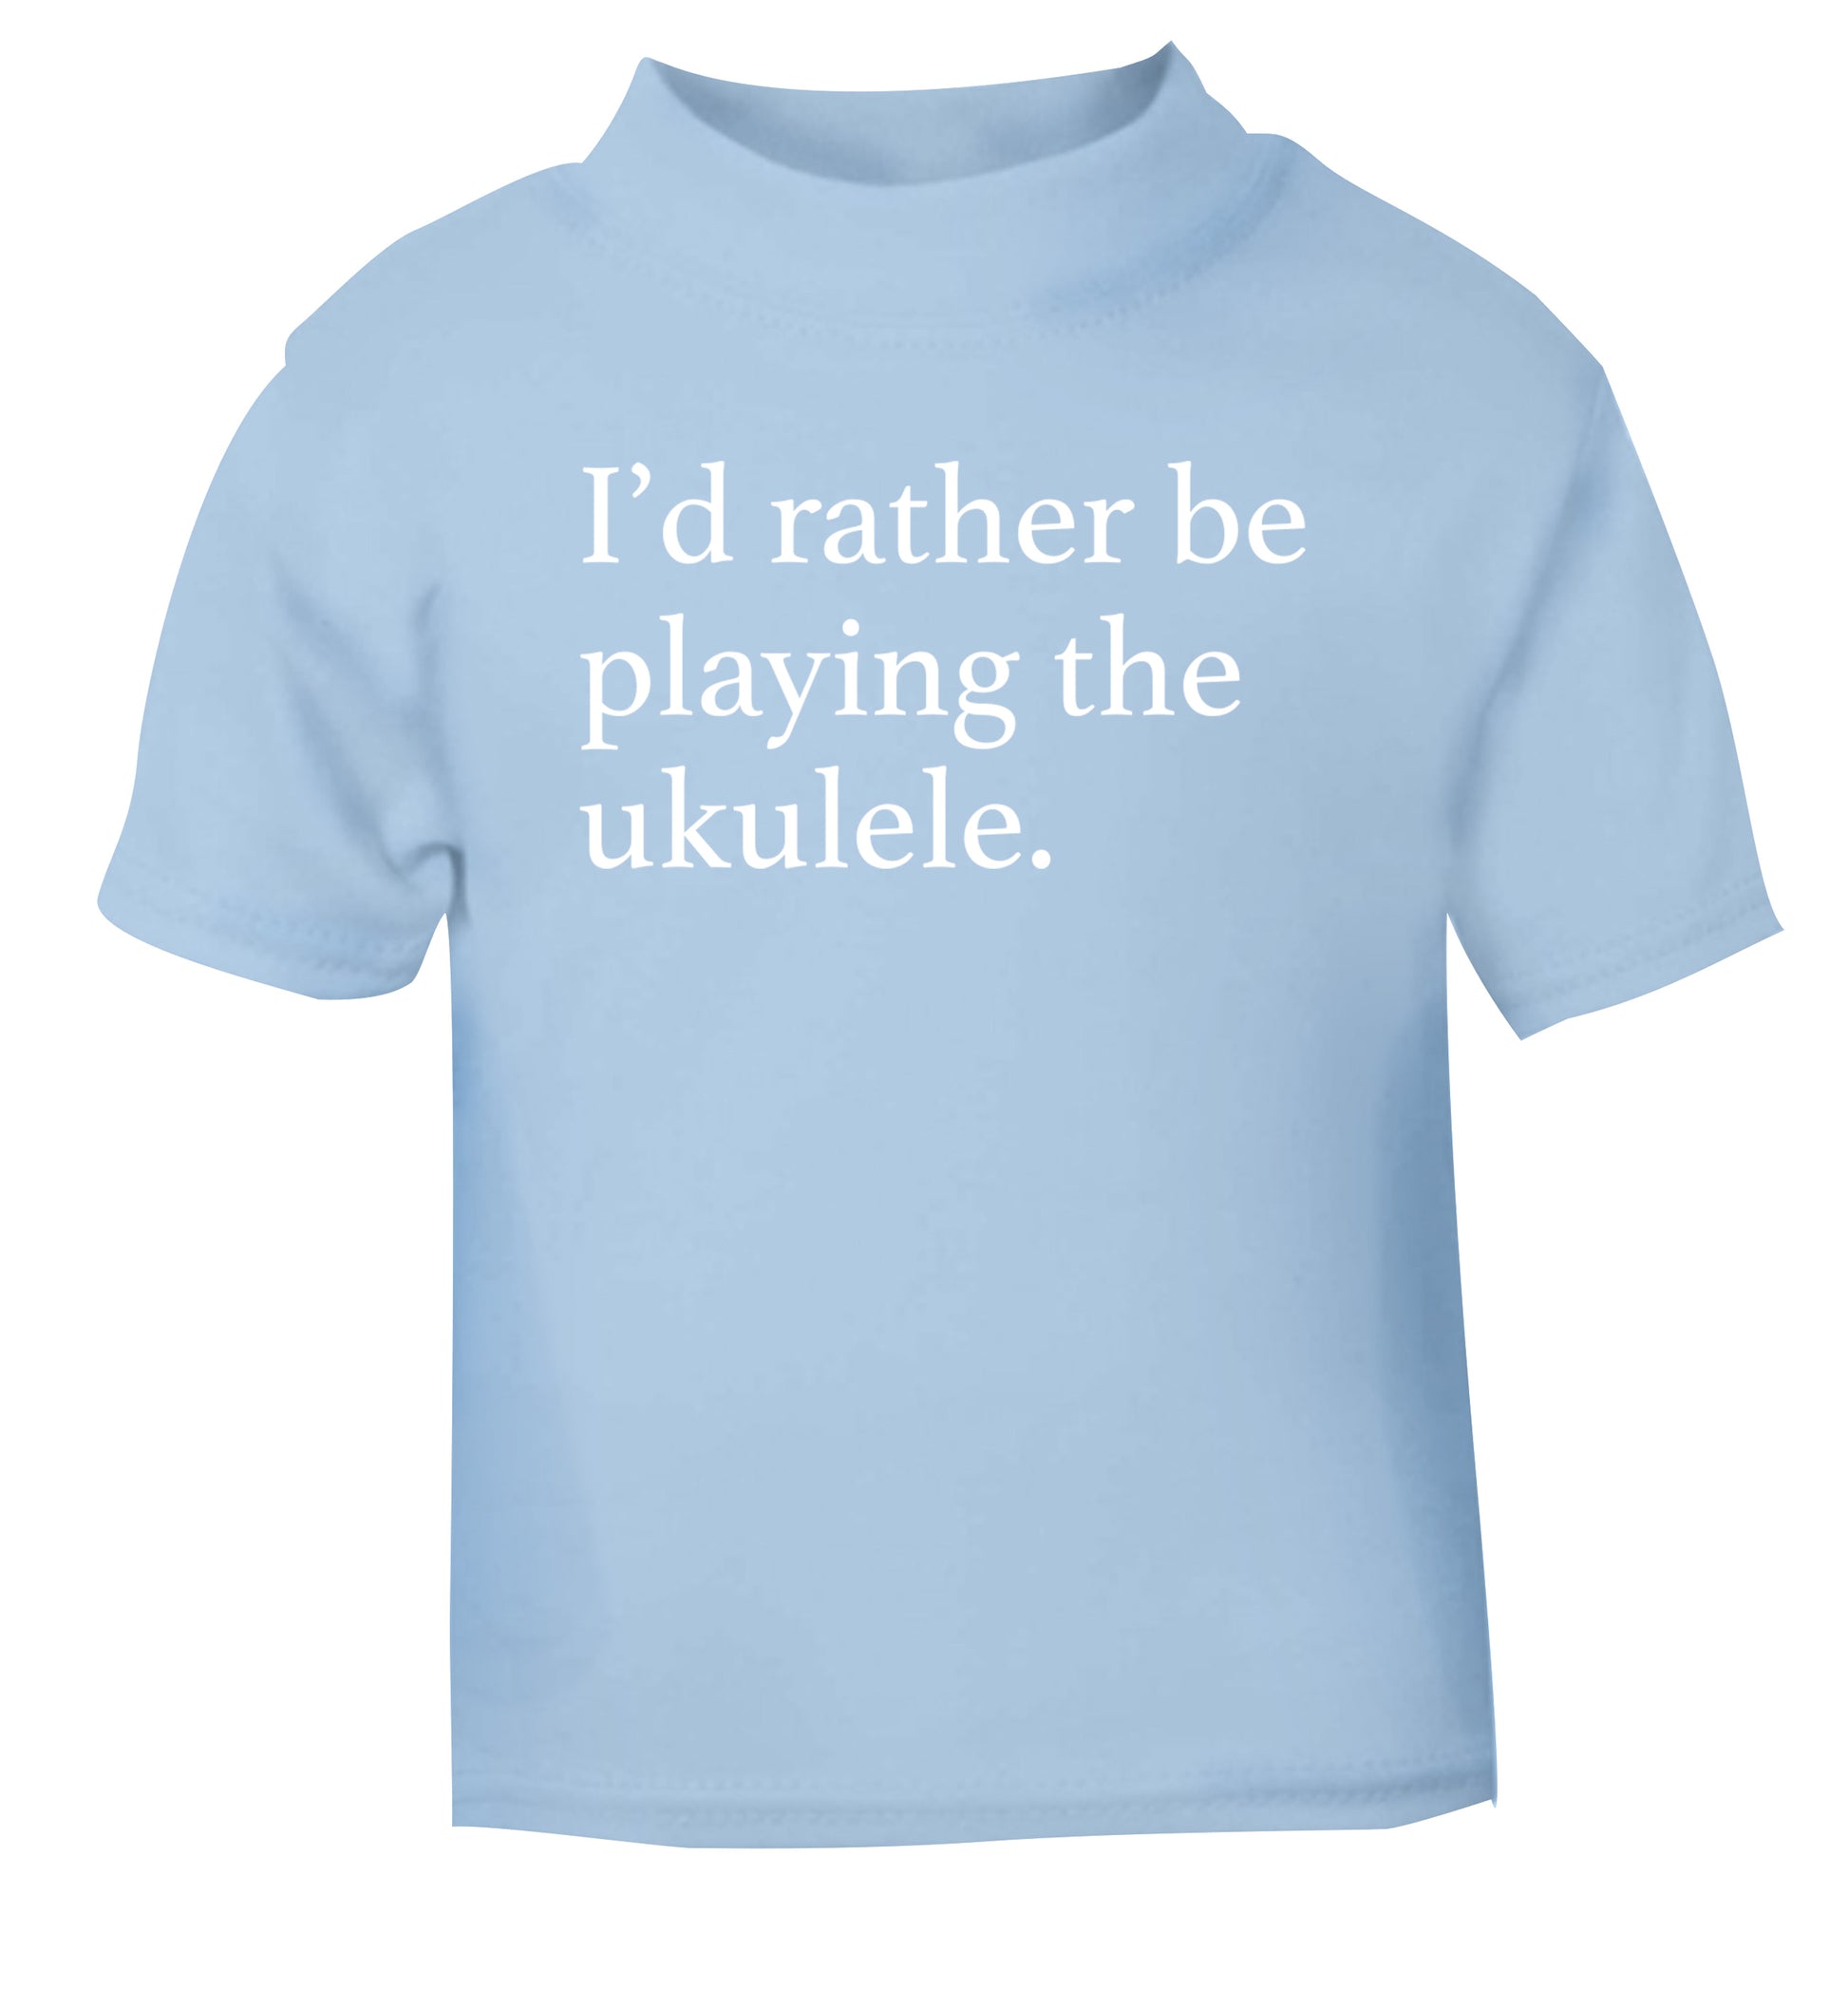 I'd rather by playing the ukulele light blue Baby Toddler Tshirt 2 Years